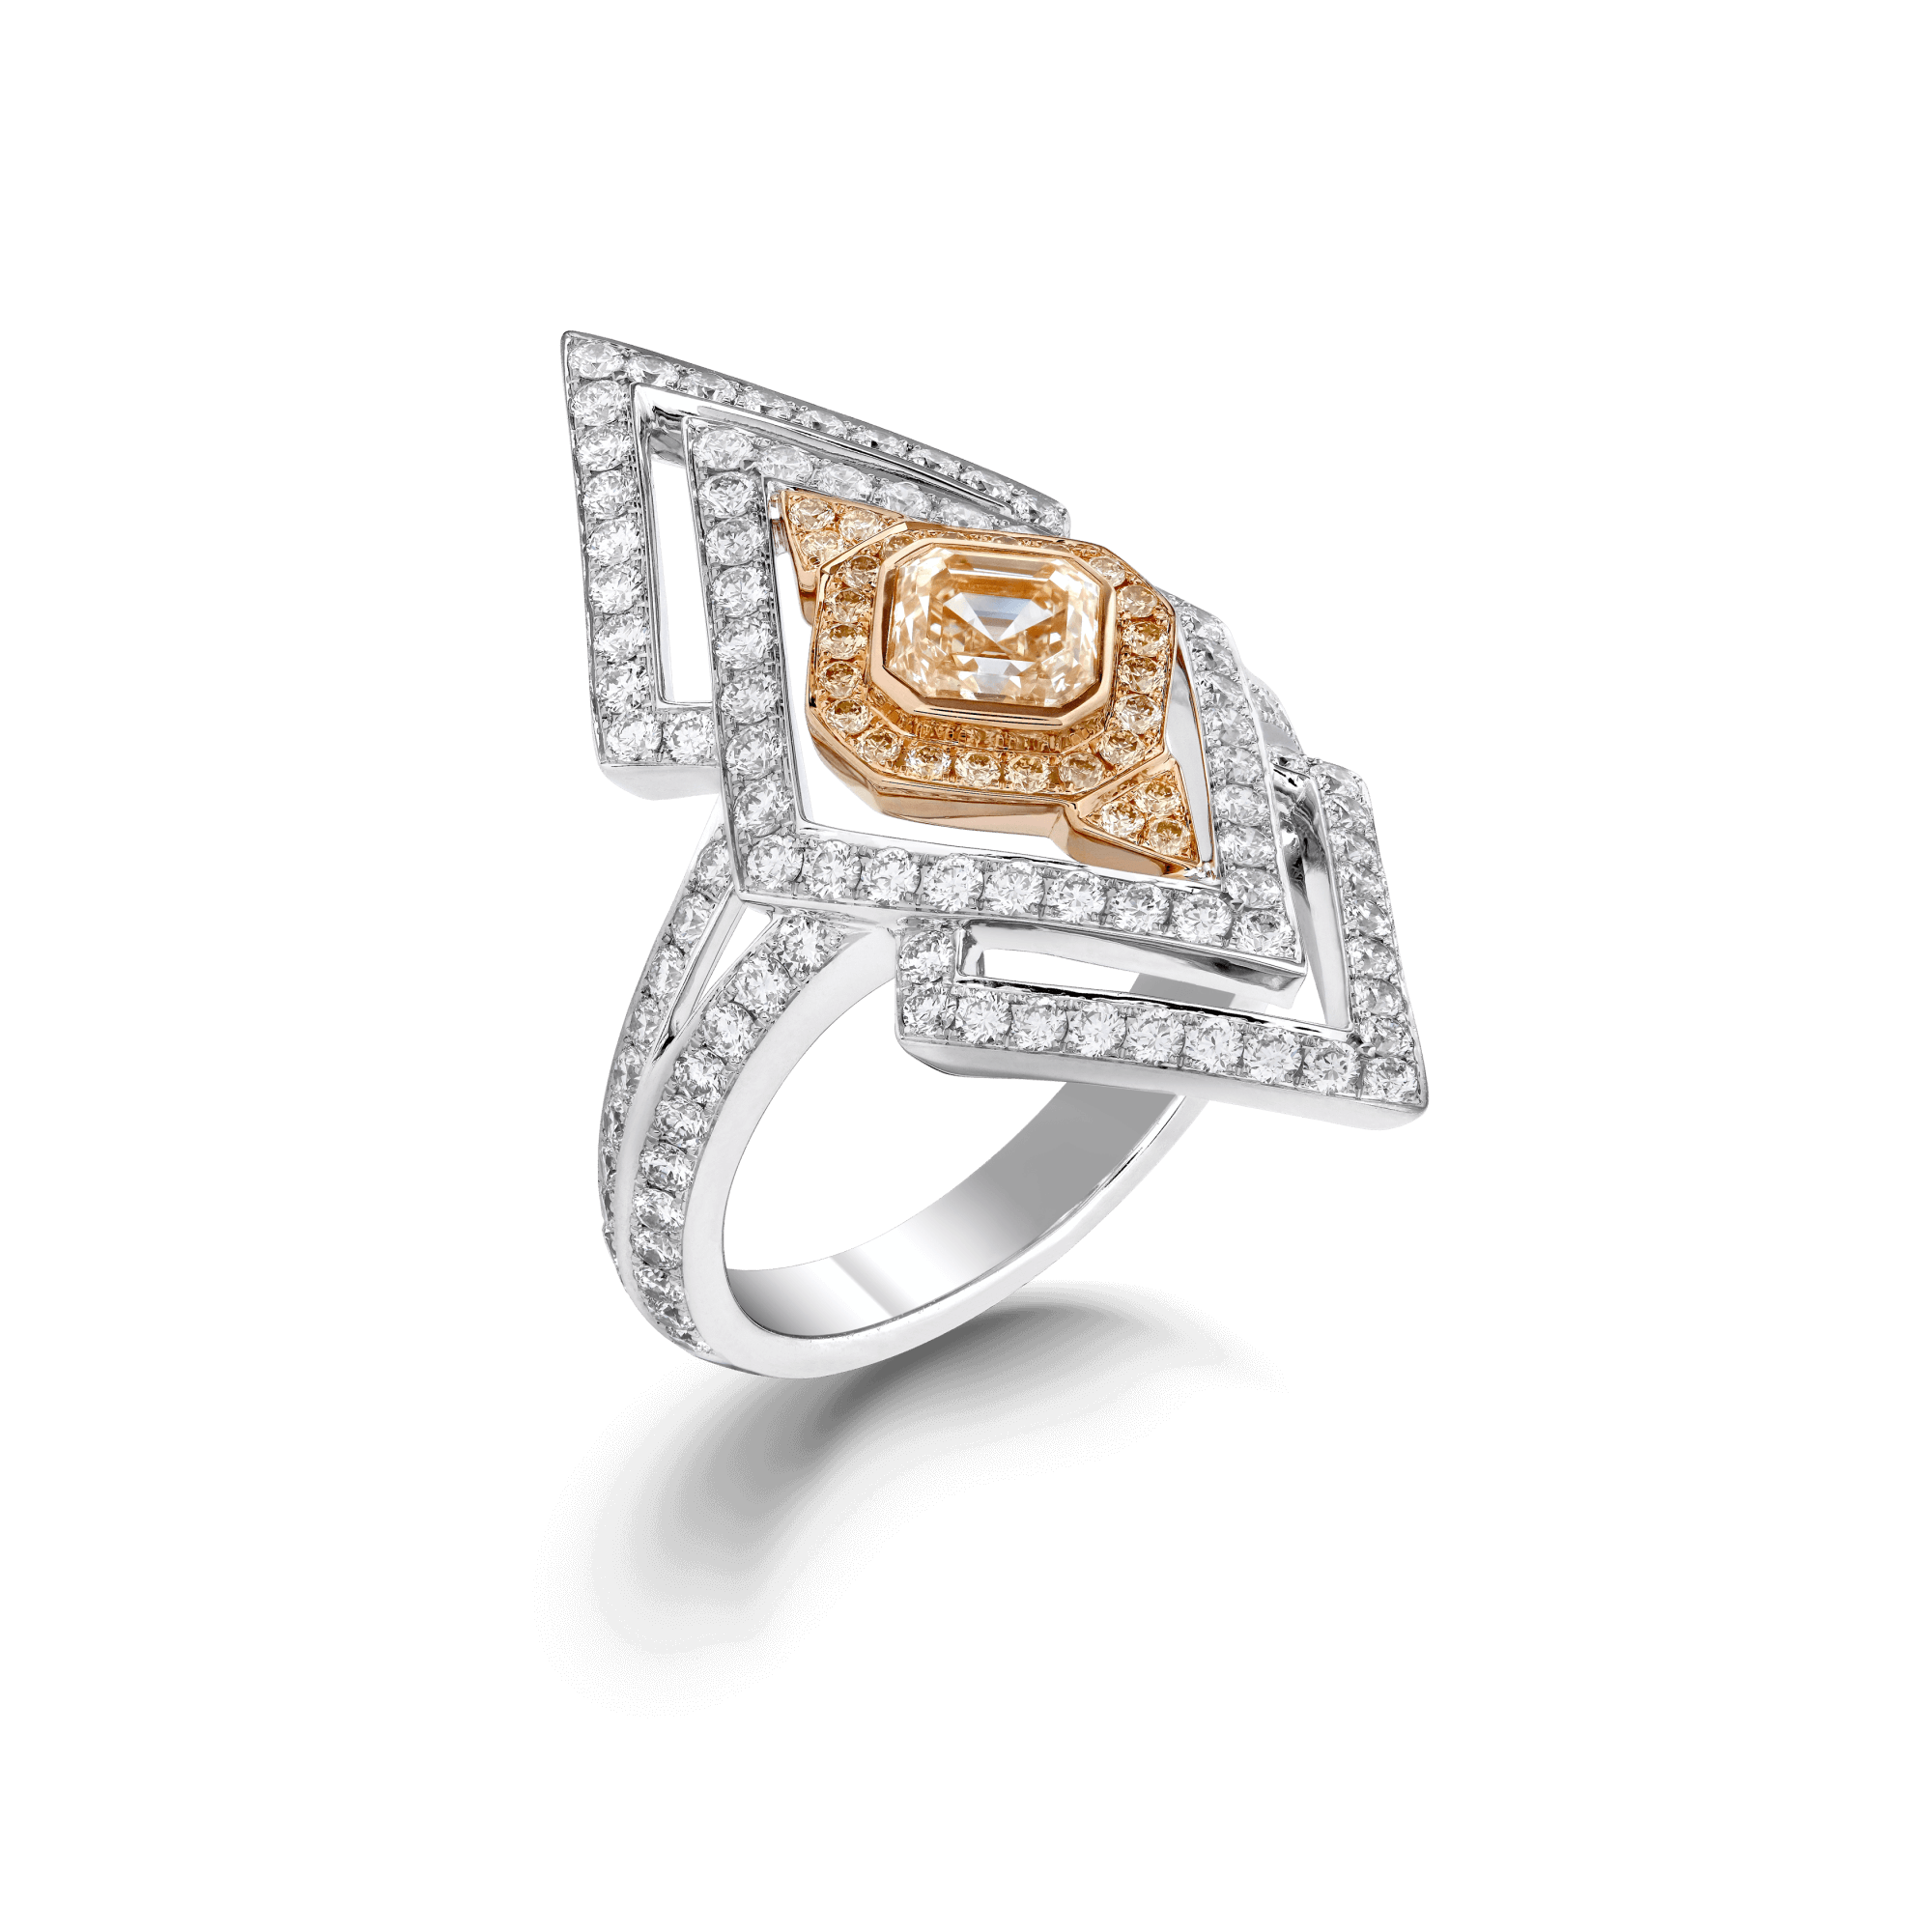 Garrard Cosmos High Jewellery Yellow and White Diamond Ring In 18ct White and Yellow Gold 2016691